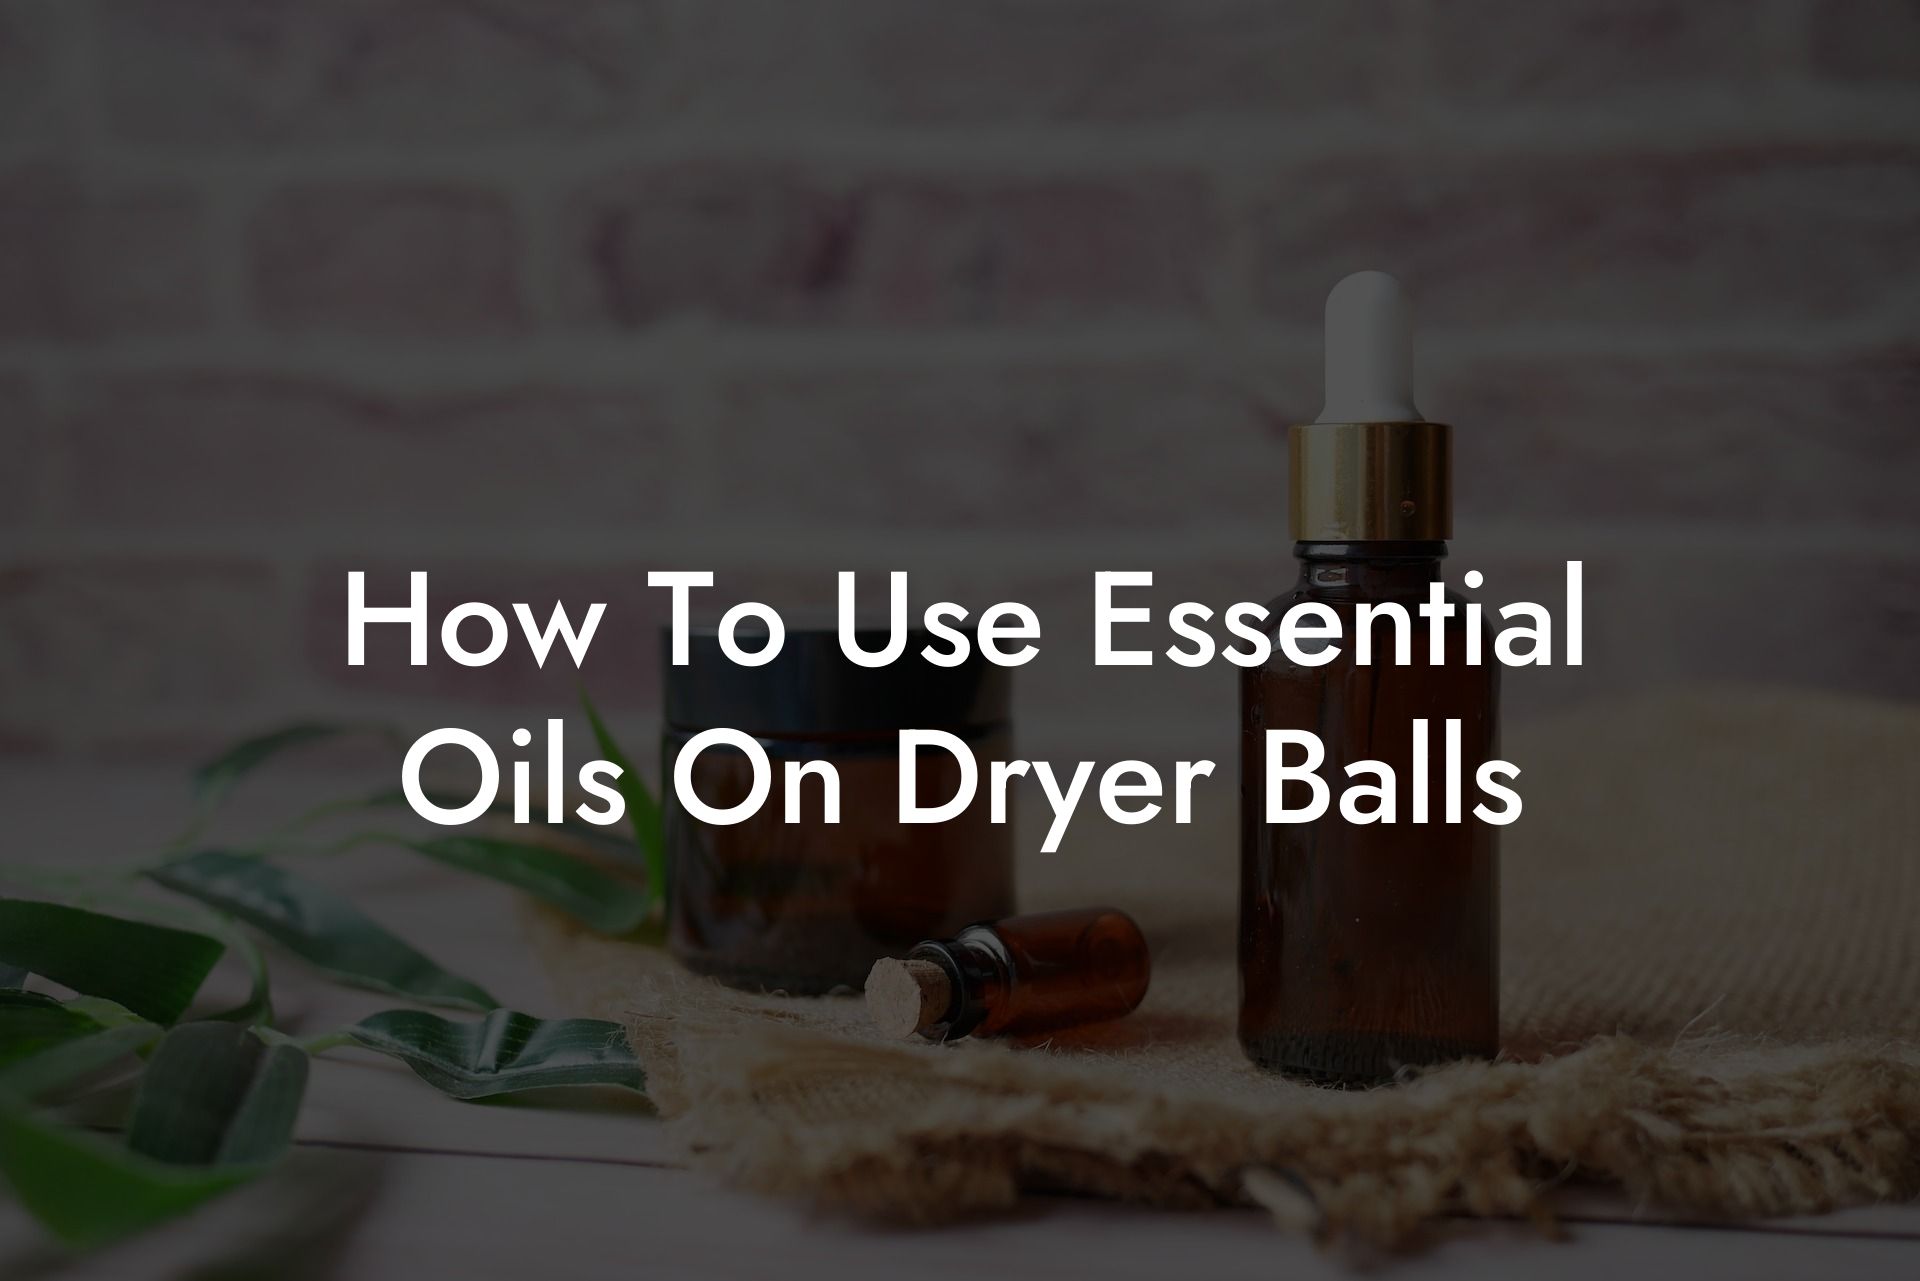 How To Use Essential Oils On Dryer Balls